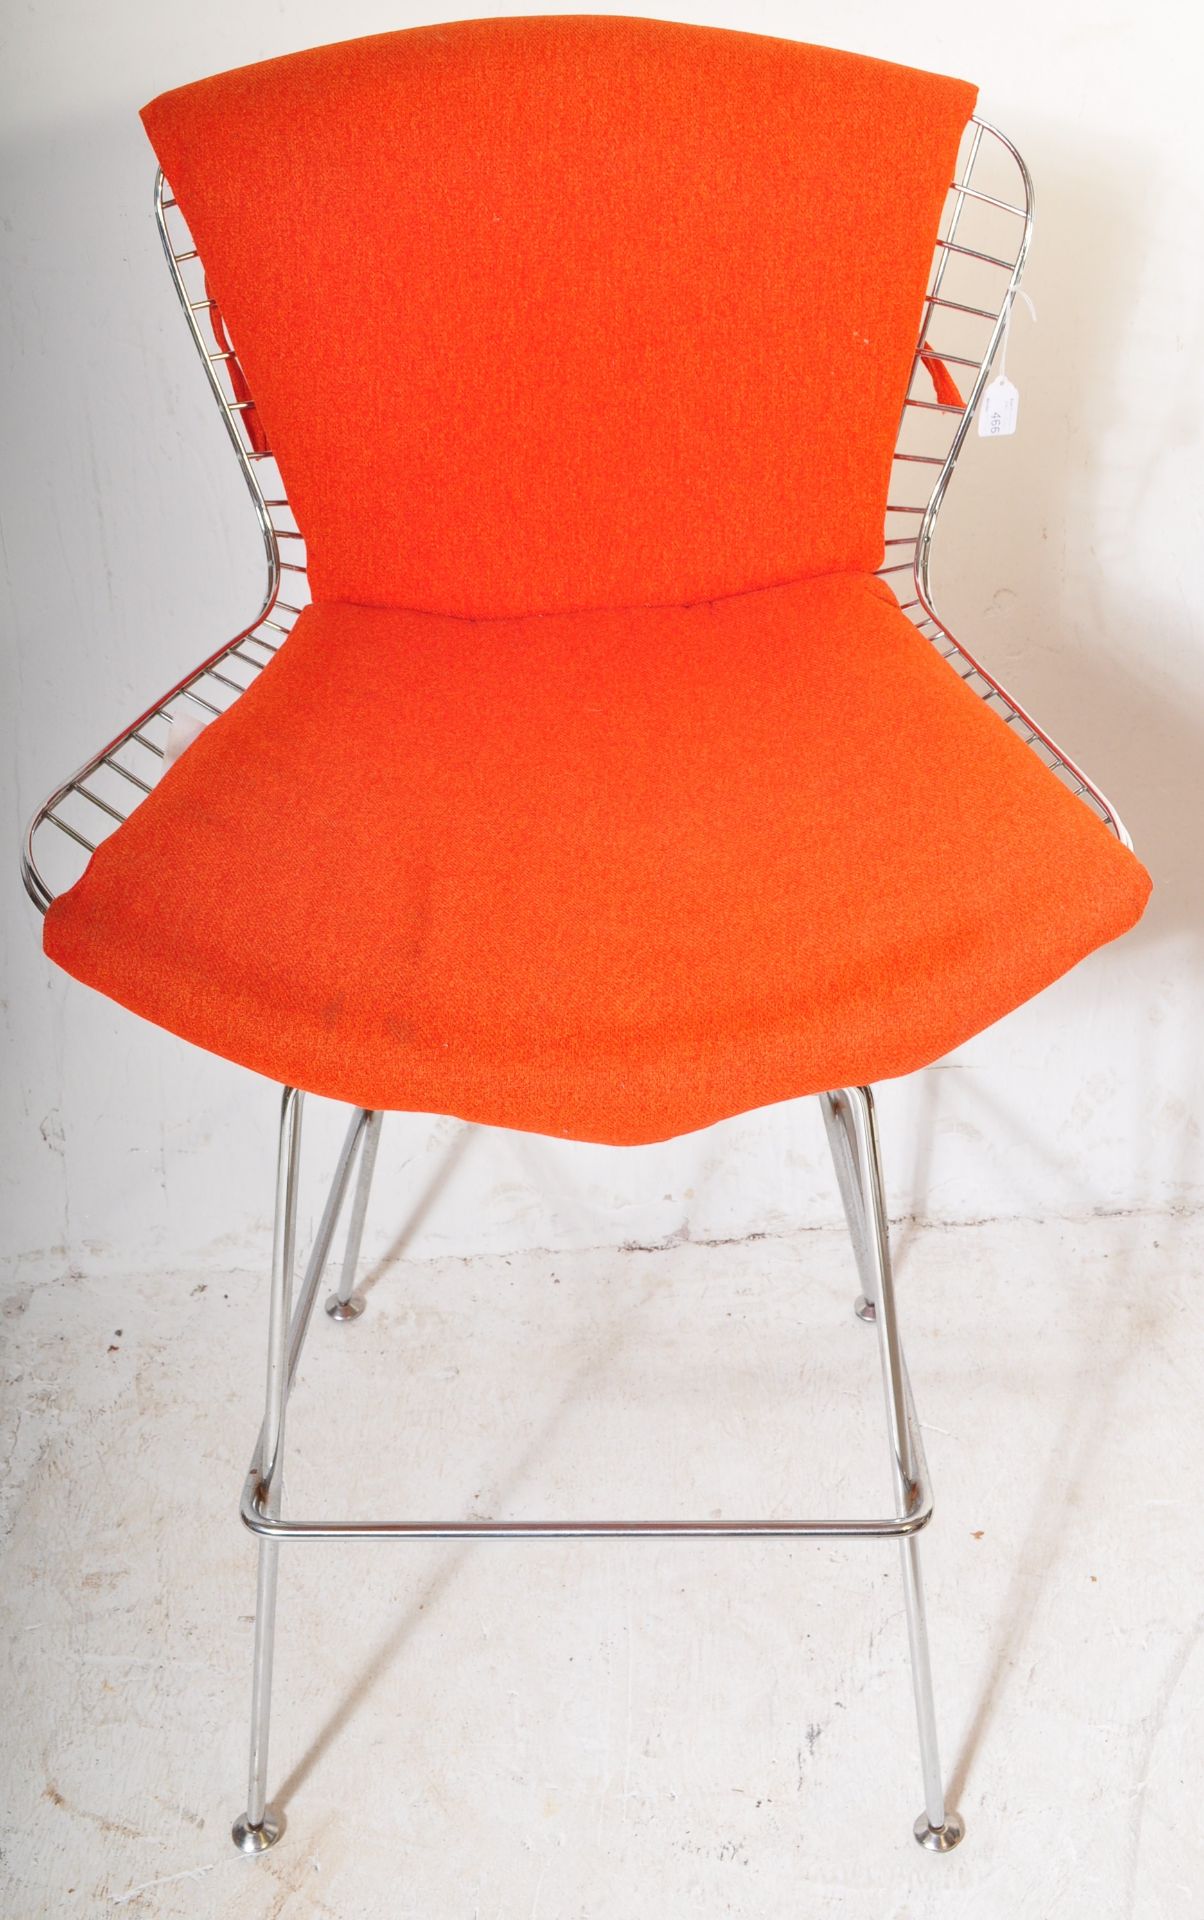 HARRY BERTOIA (MANNER OF) - 20TH CENTURY WIRE WORK CHAIR - Image 8 of 9